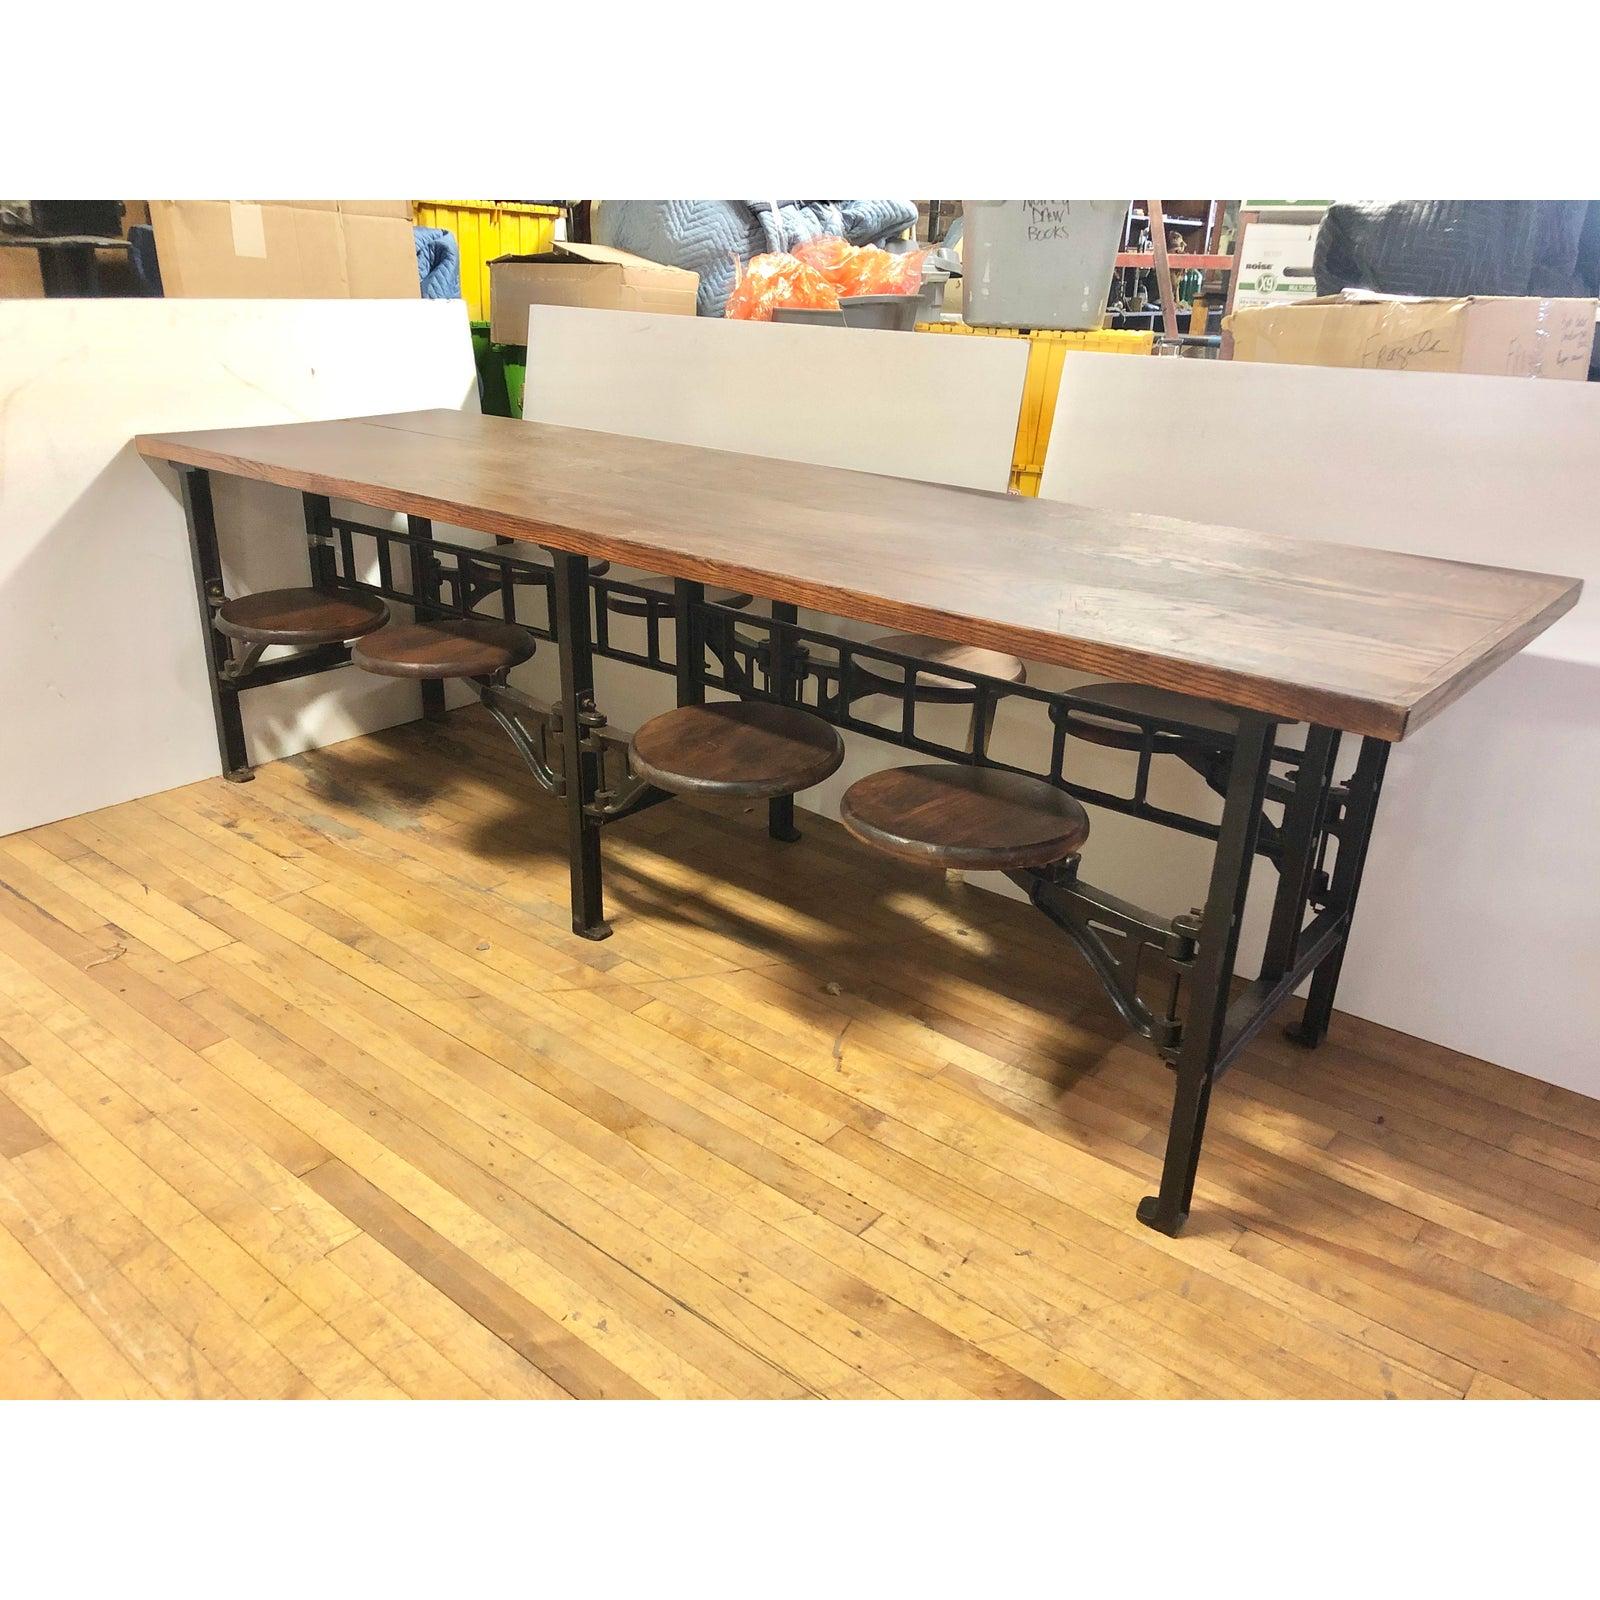 1920’s original American 8 swing out lunchroom table with cast iron base and wood top. Seat H 19”, diameter 13”, the widest
Distance from table 14” less.